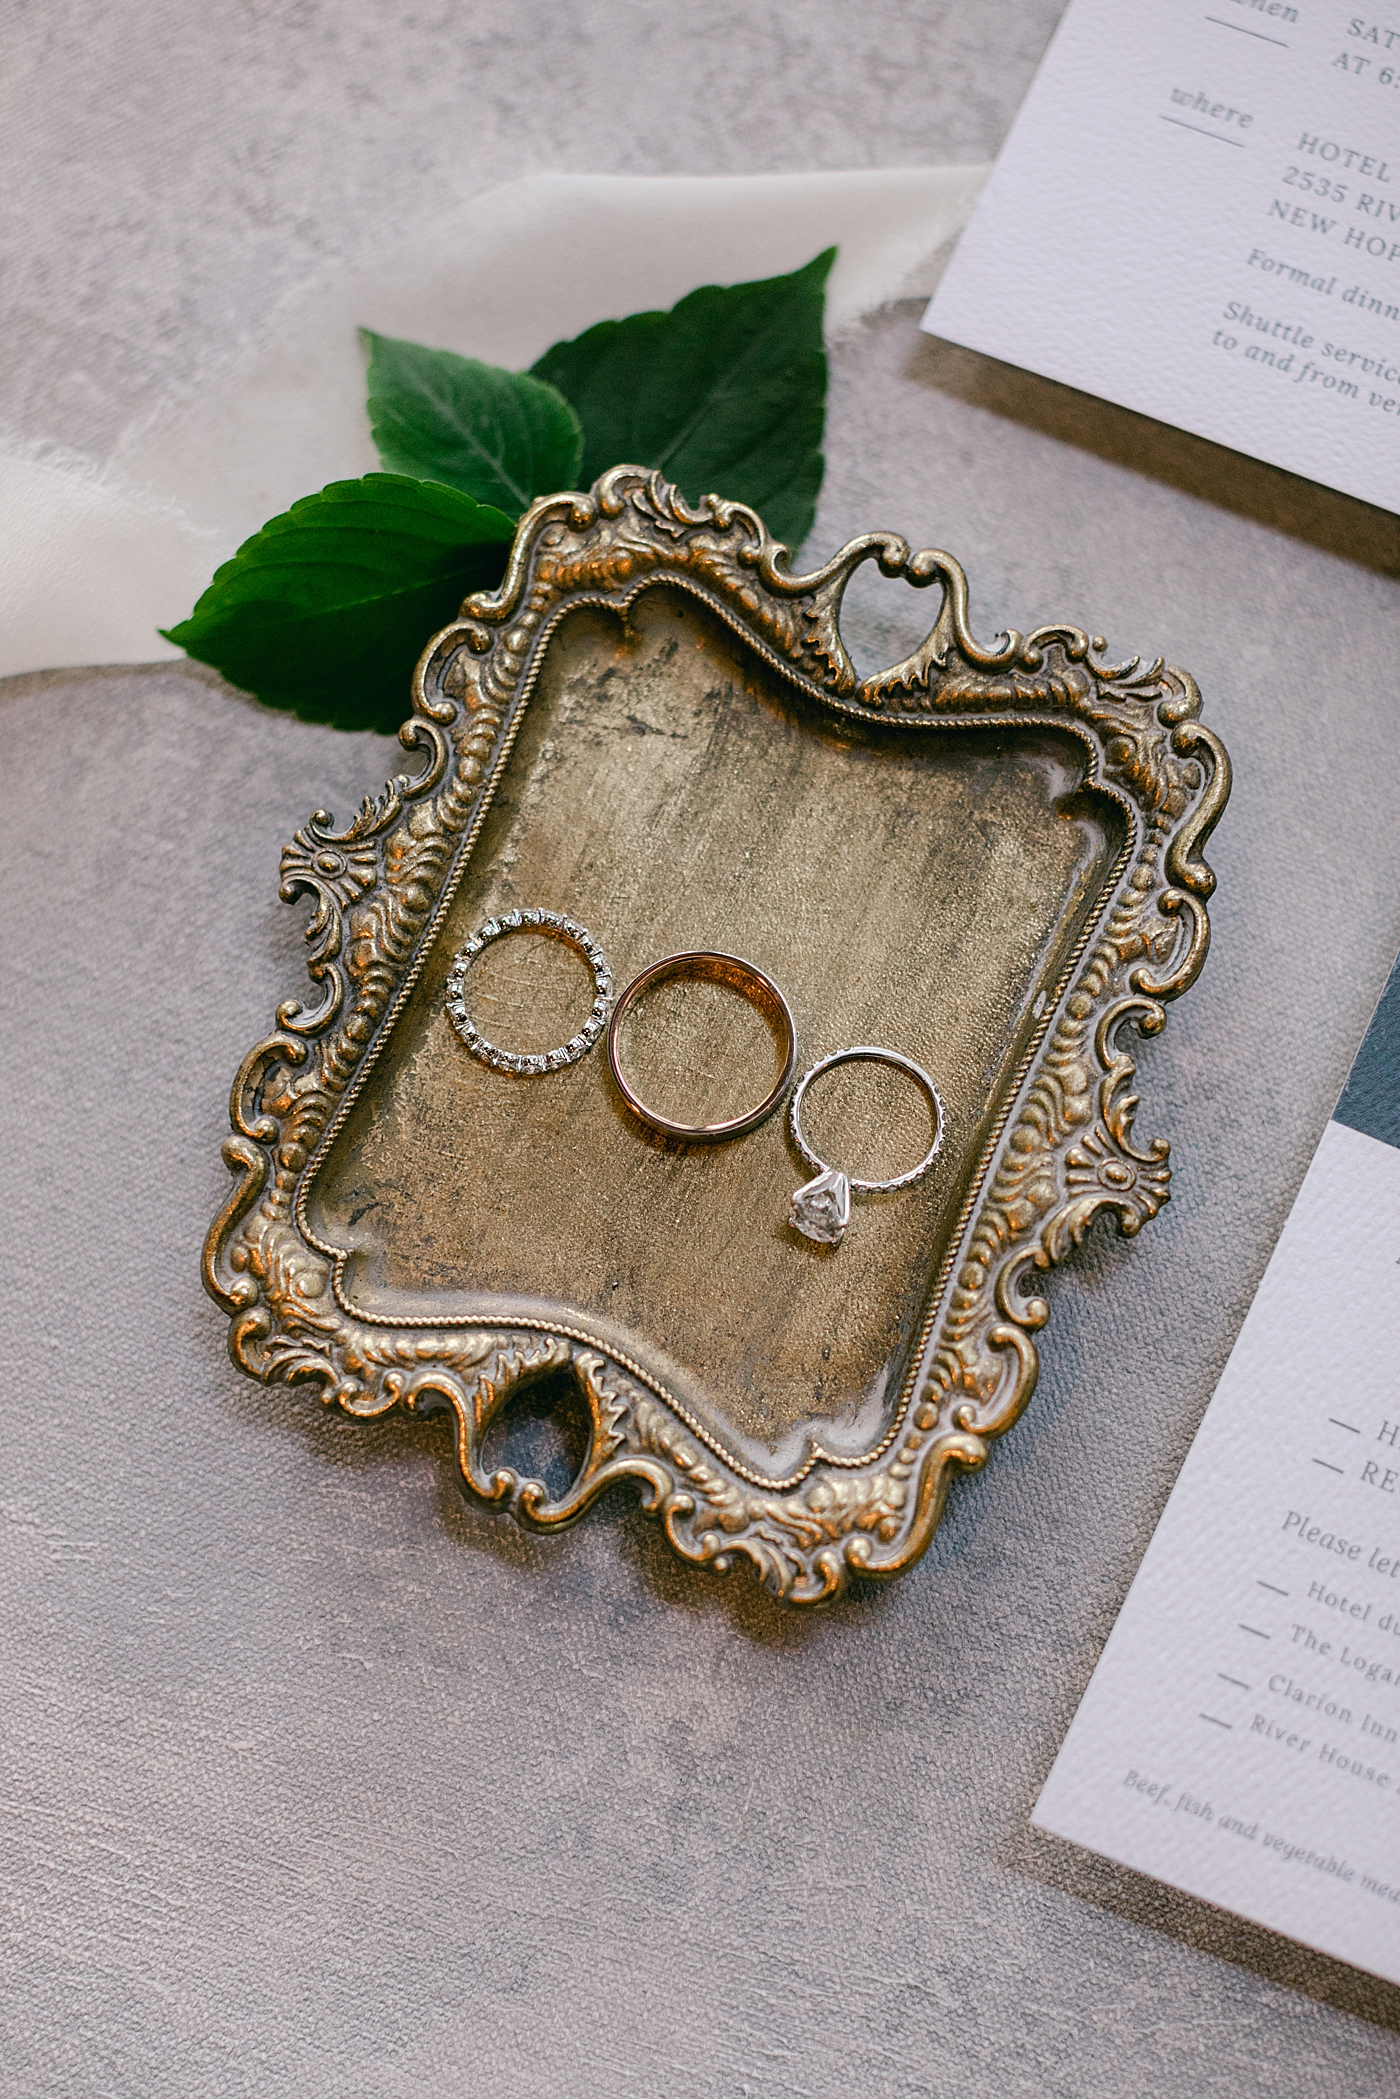 Wedding rings on a brass dish during Hotel du Village Wedding | Image by Hope Helmuth Photography